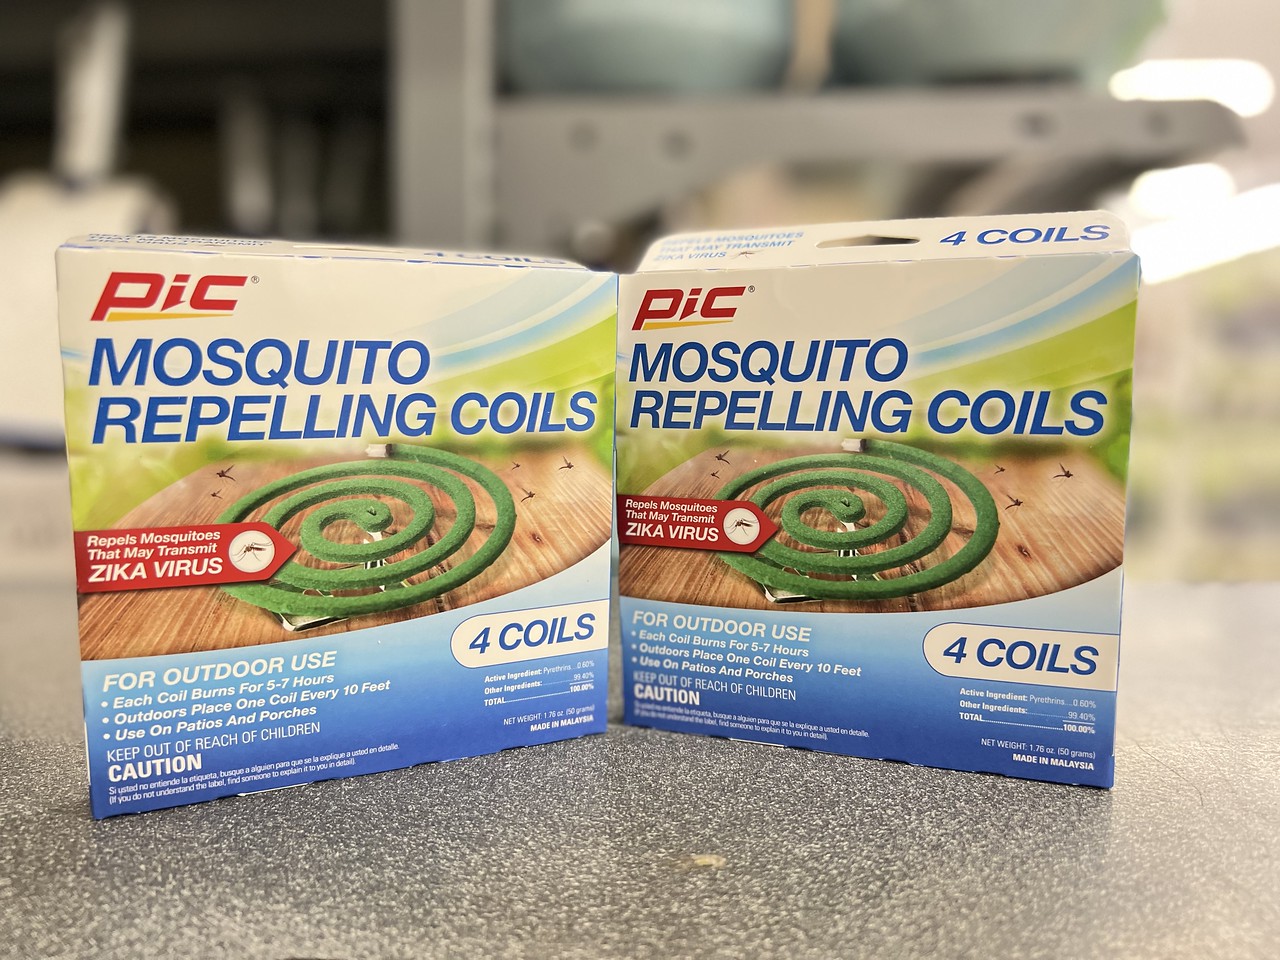 two boxes of Pic Mosquito Repellent Coils displayed side by side on counter